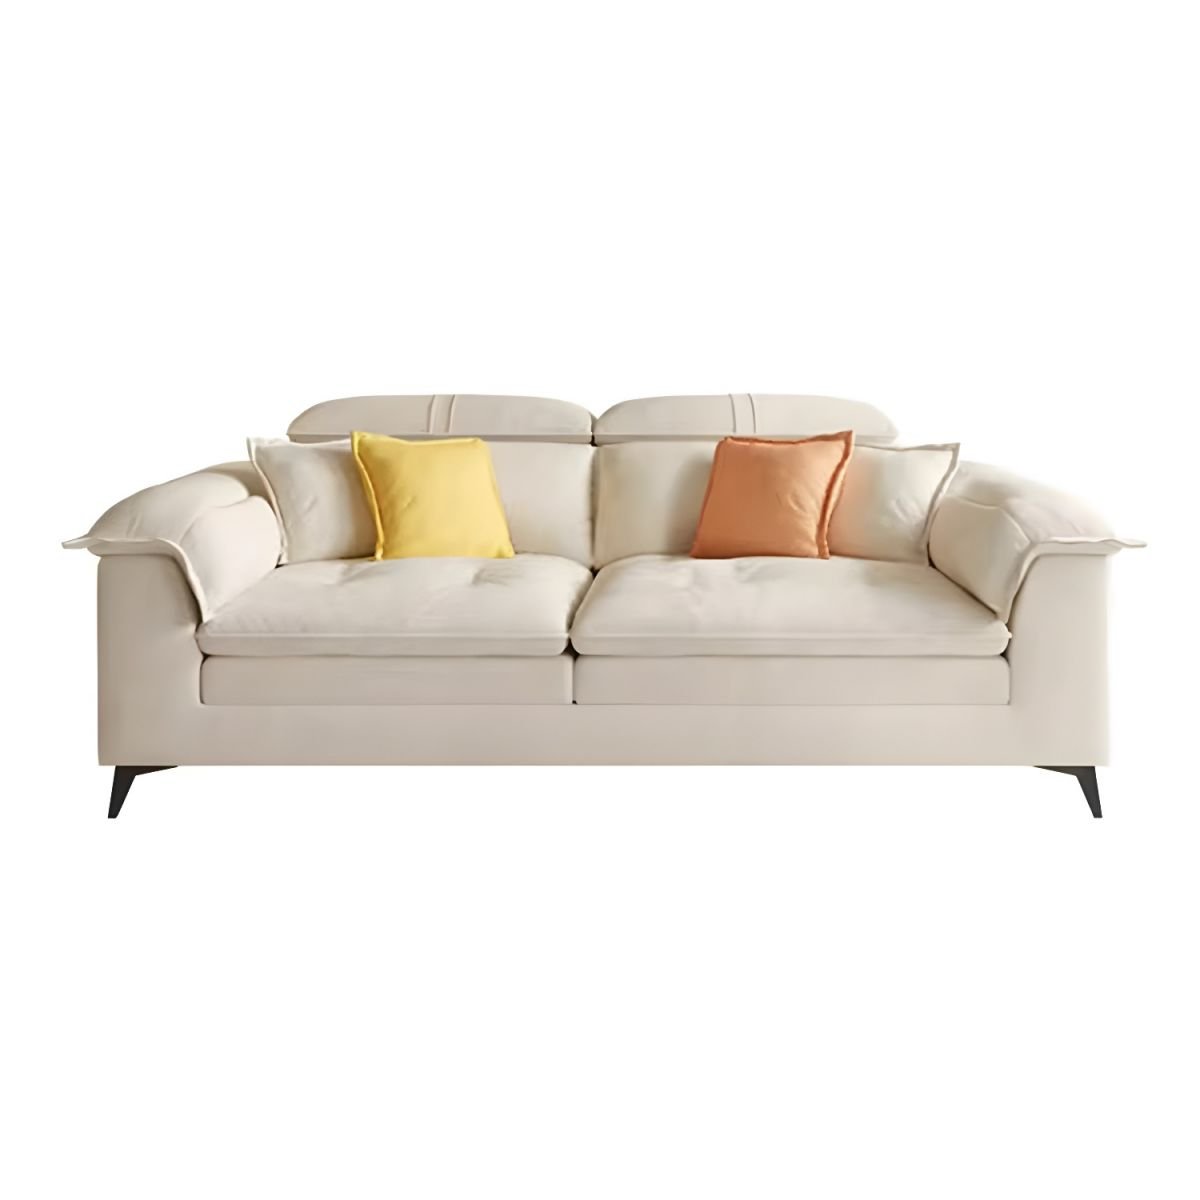 Faux Leather Modern Sectional Sofa in White with Pillow Top Arm - Tech Cloth 83"L x 39"W x 29"H